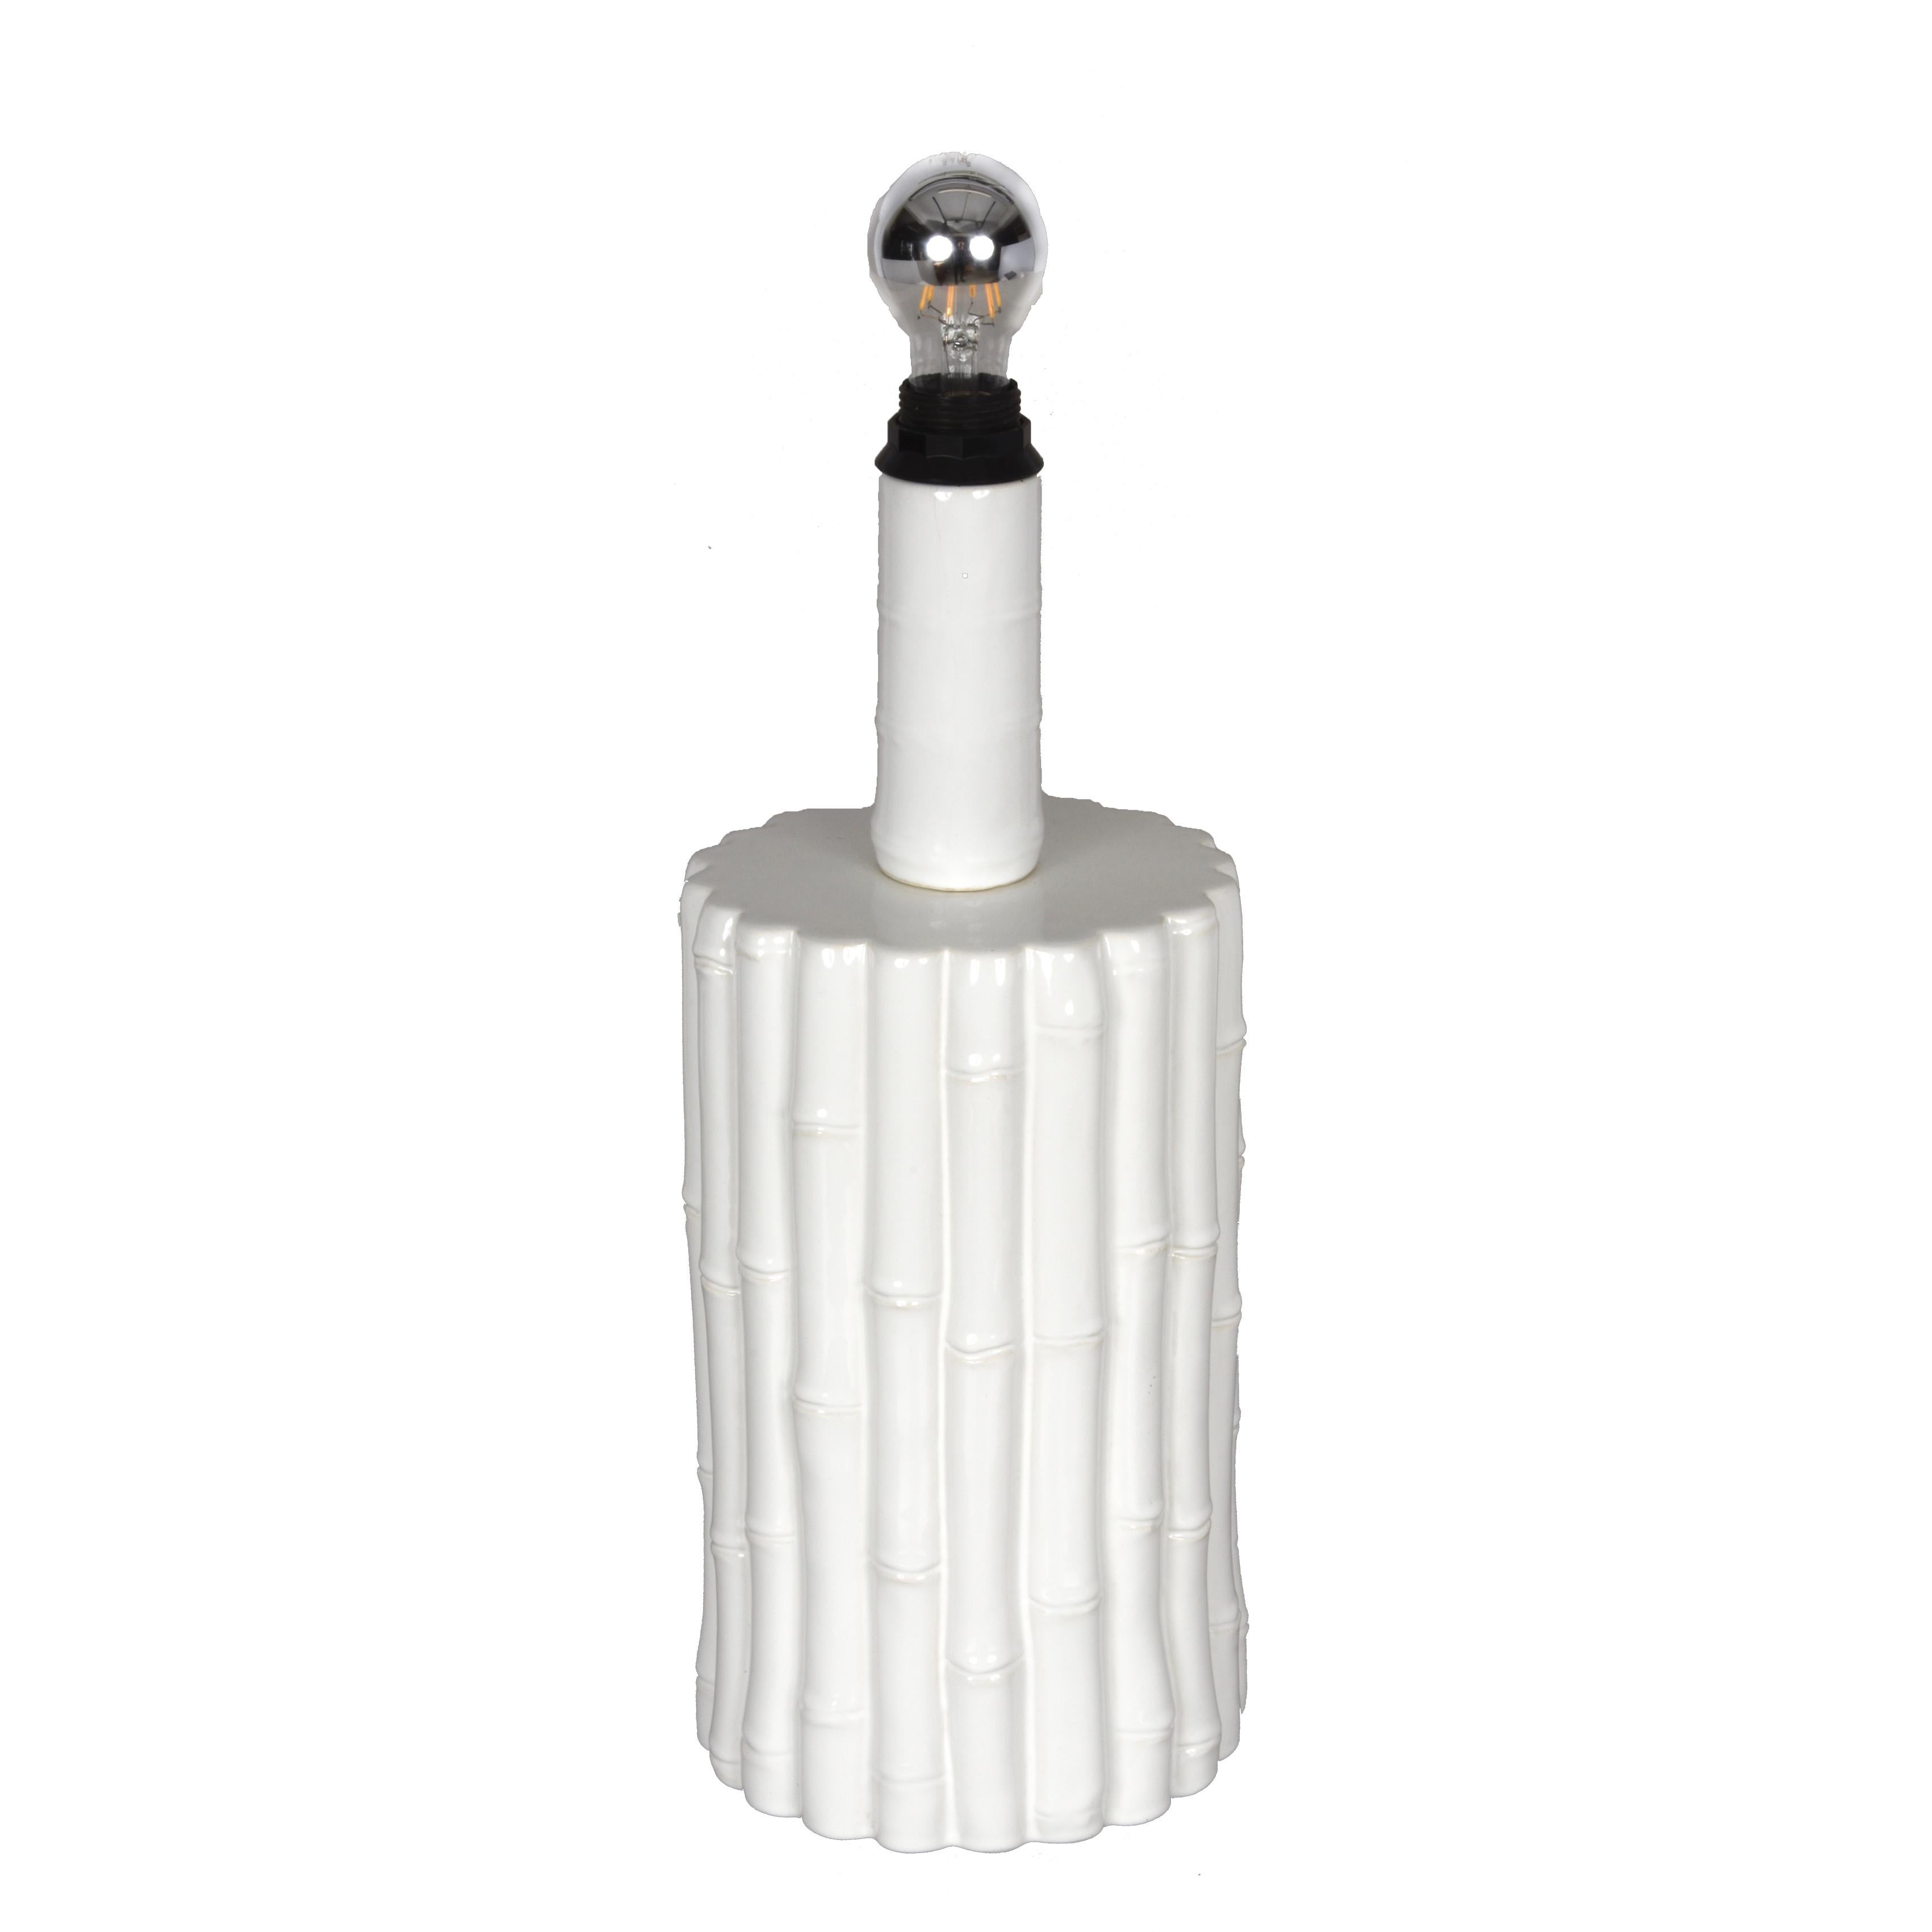 Tommaso Barbi Midcentury White Ceramic and Faux Bamboo Italian Table Lamp, 1970s For Sale 2